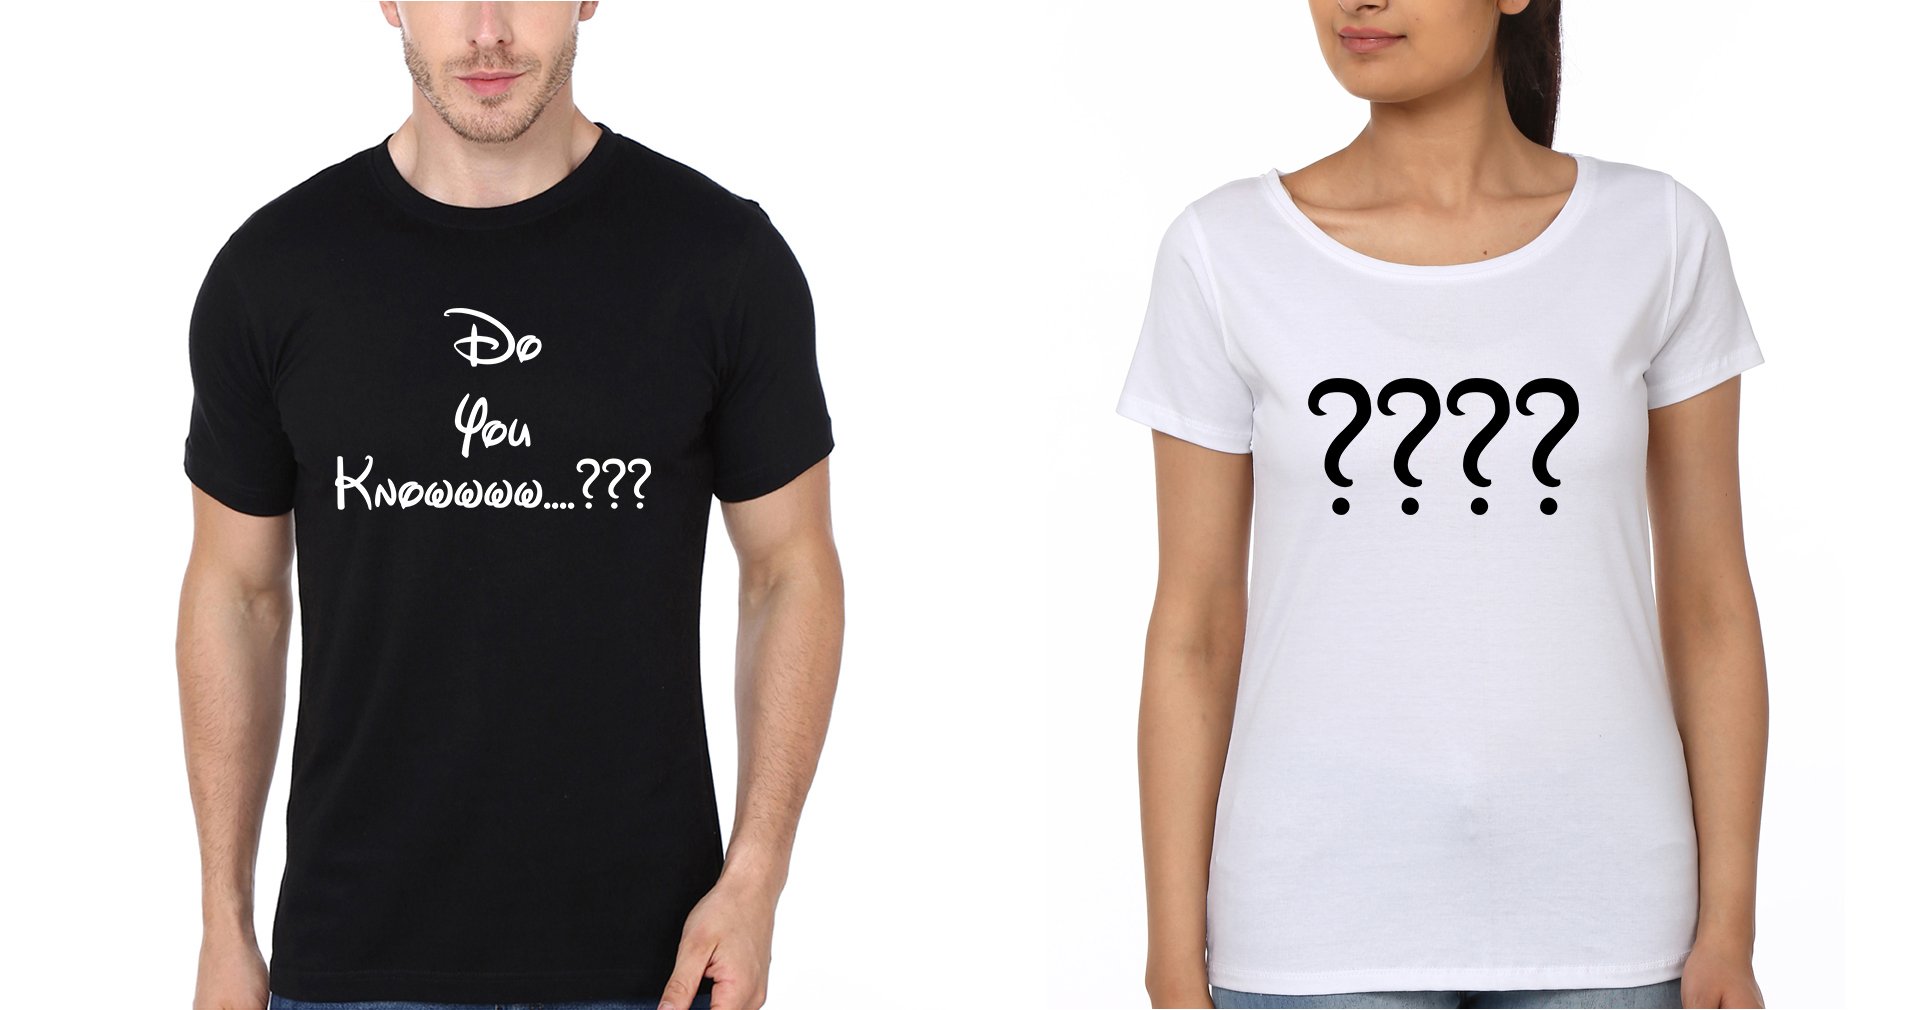 Do You Know Couple Half Sleeves T-Shirts -FunkyTees